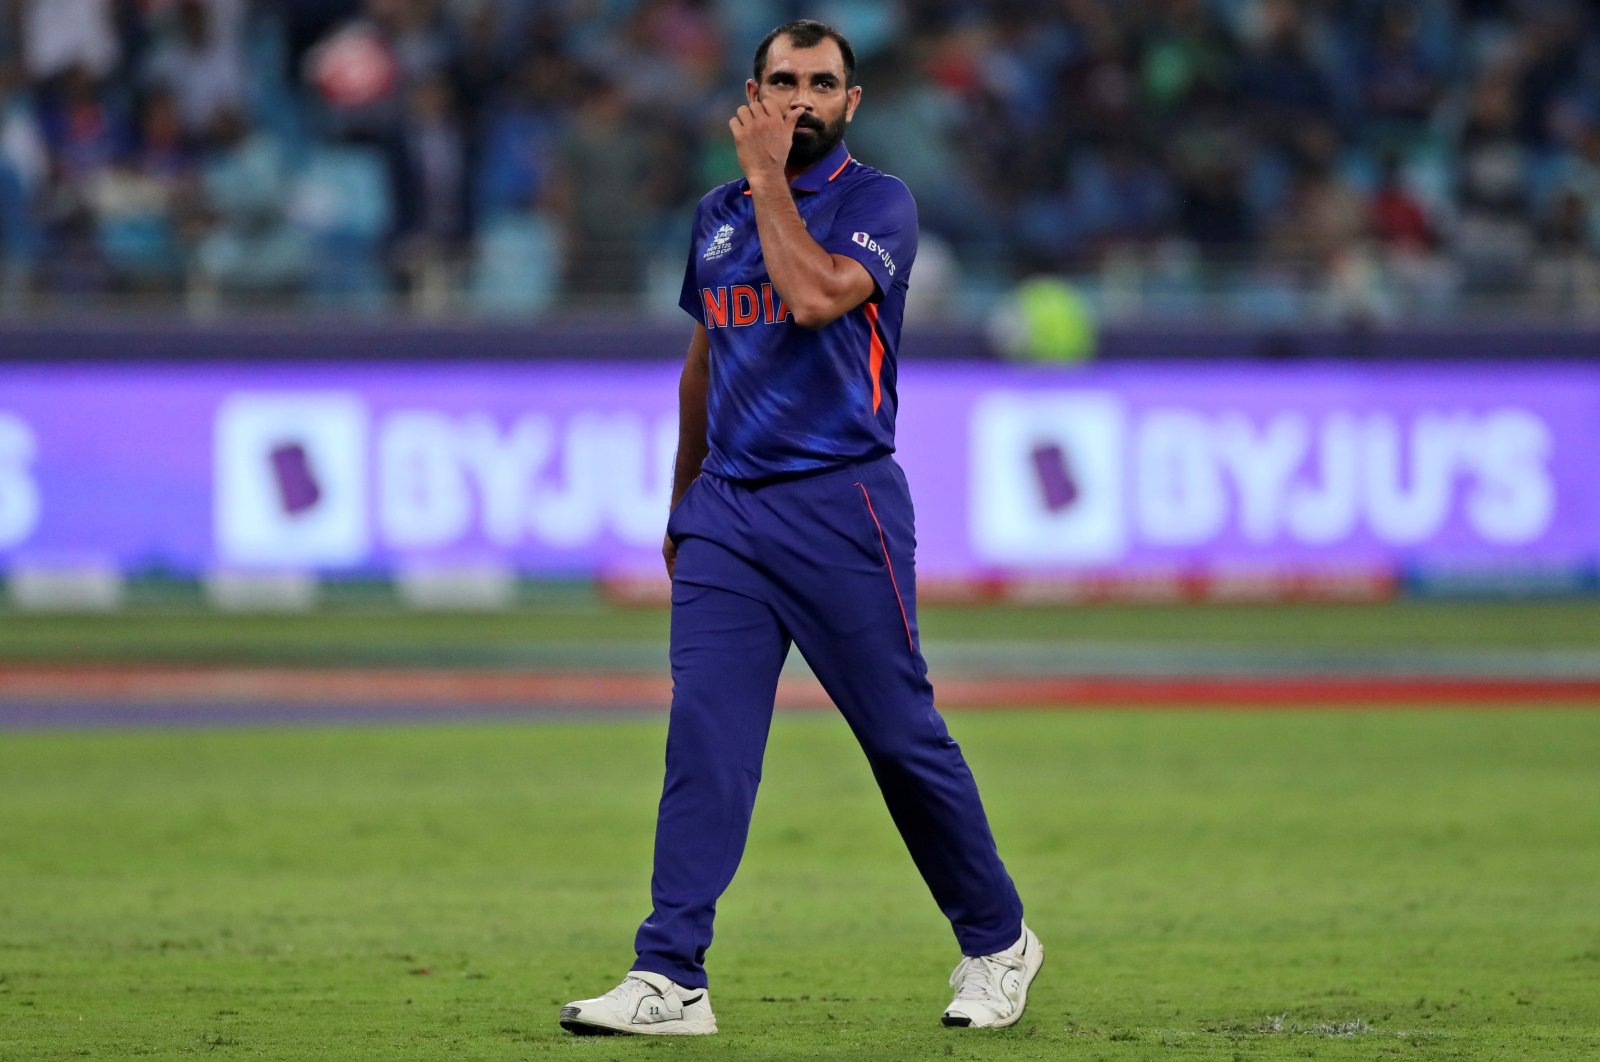 India's Mohammed Shami reacts during a Cricket Twenty20 World Cup match against Pakistan in Dubai, UAE, Oct. 24, 2021. (AP Photo)